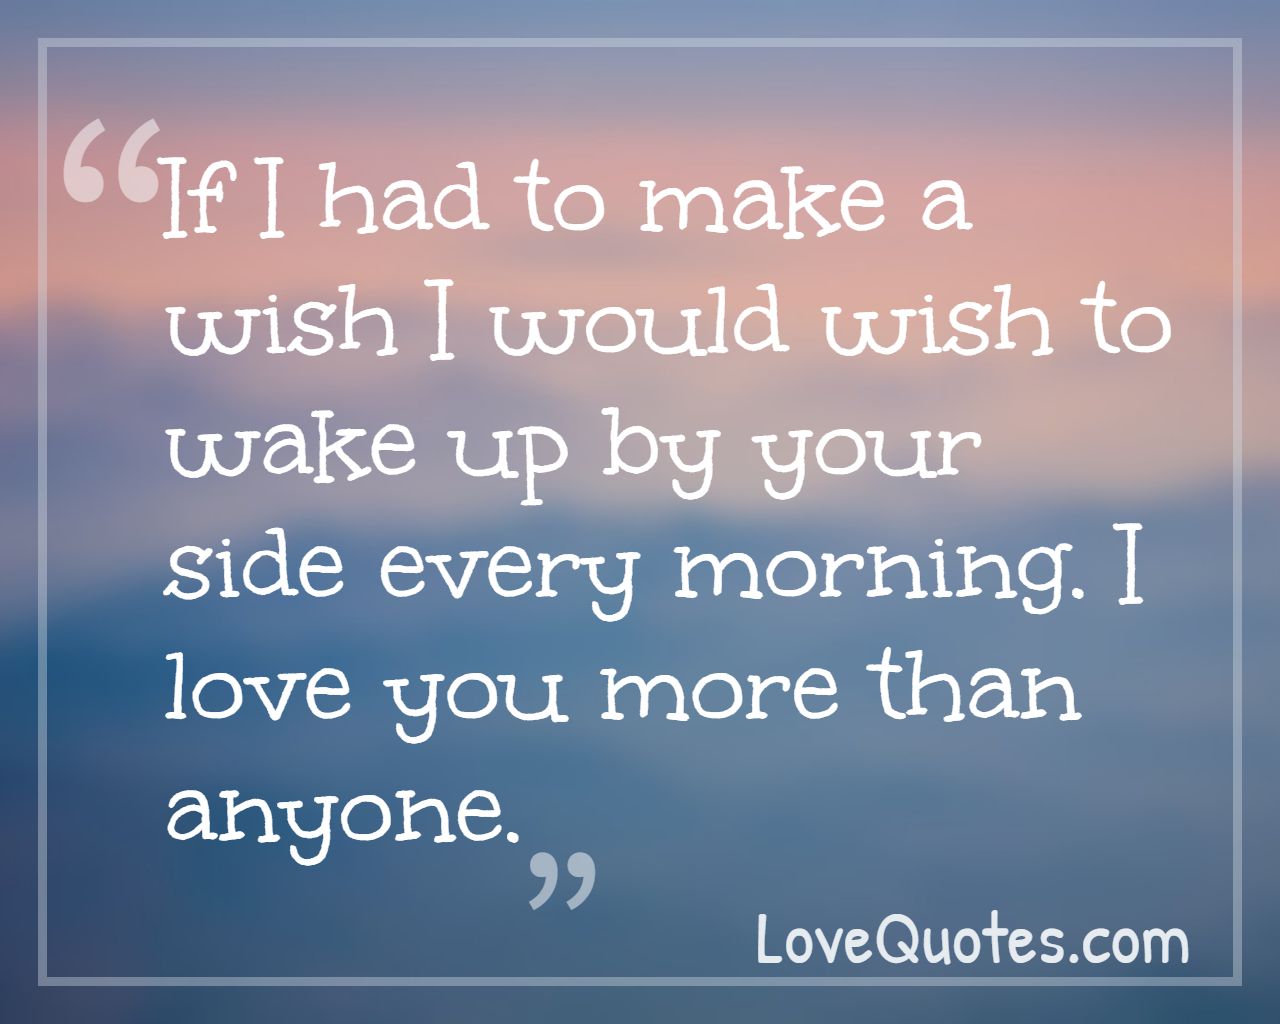 Make A Wish - Love Quotes